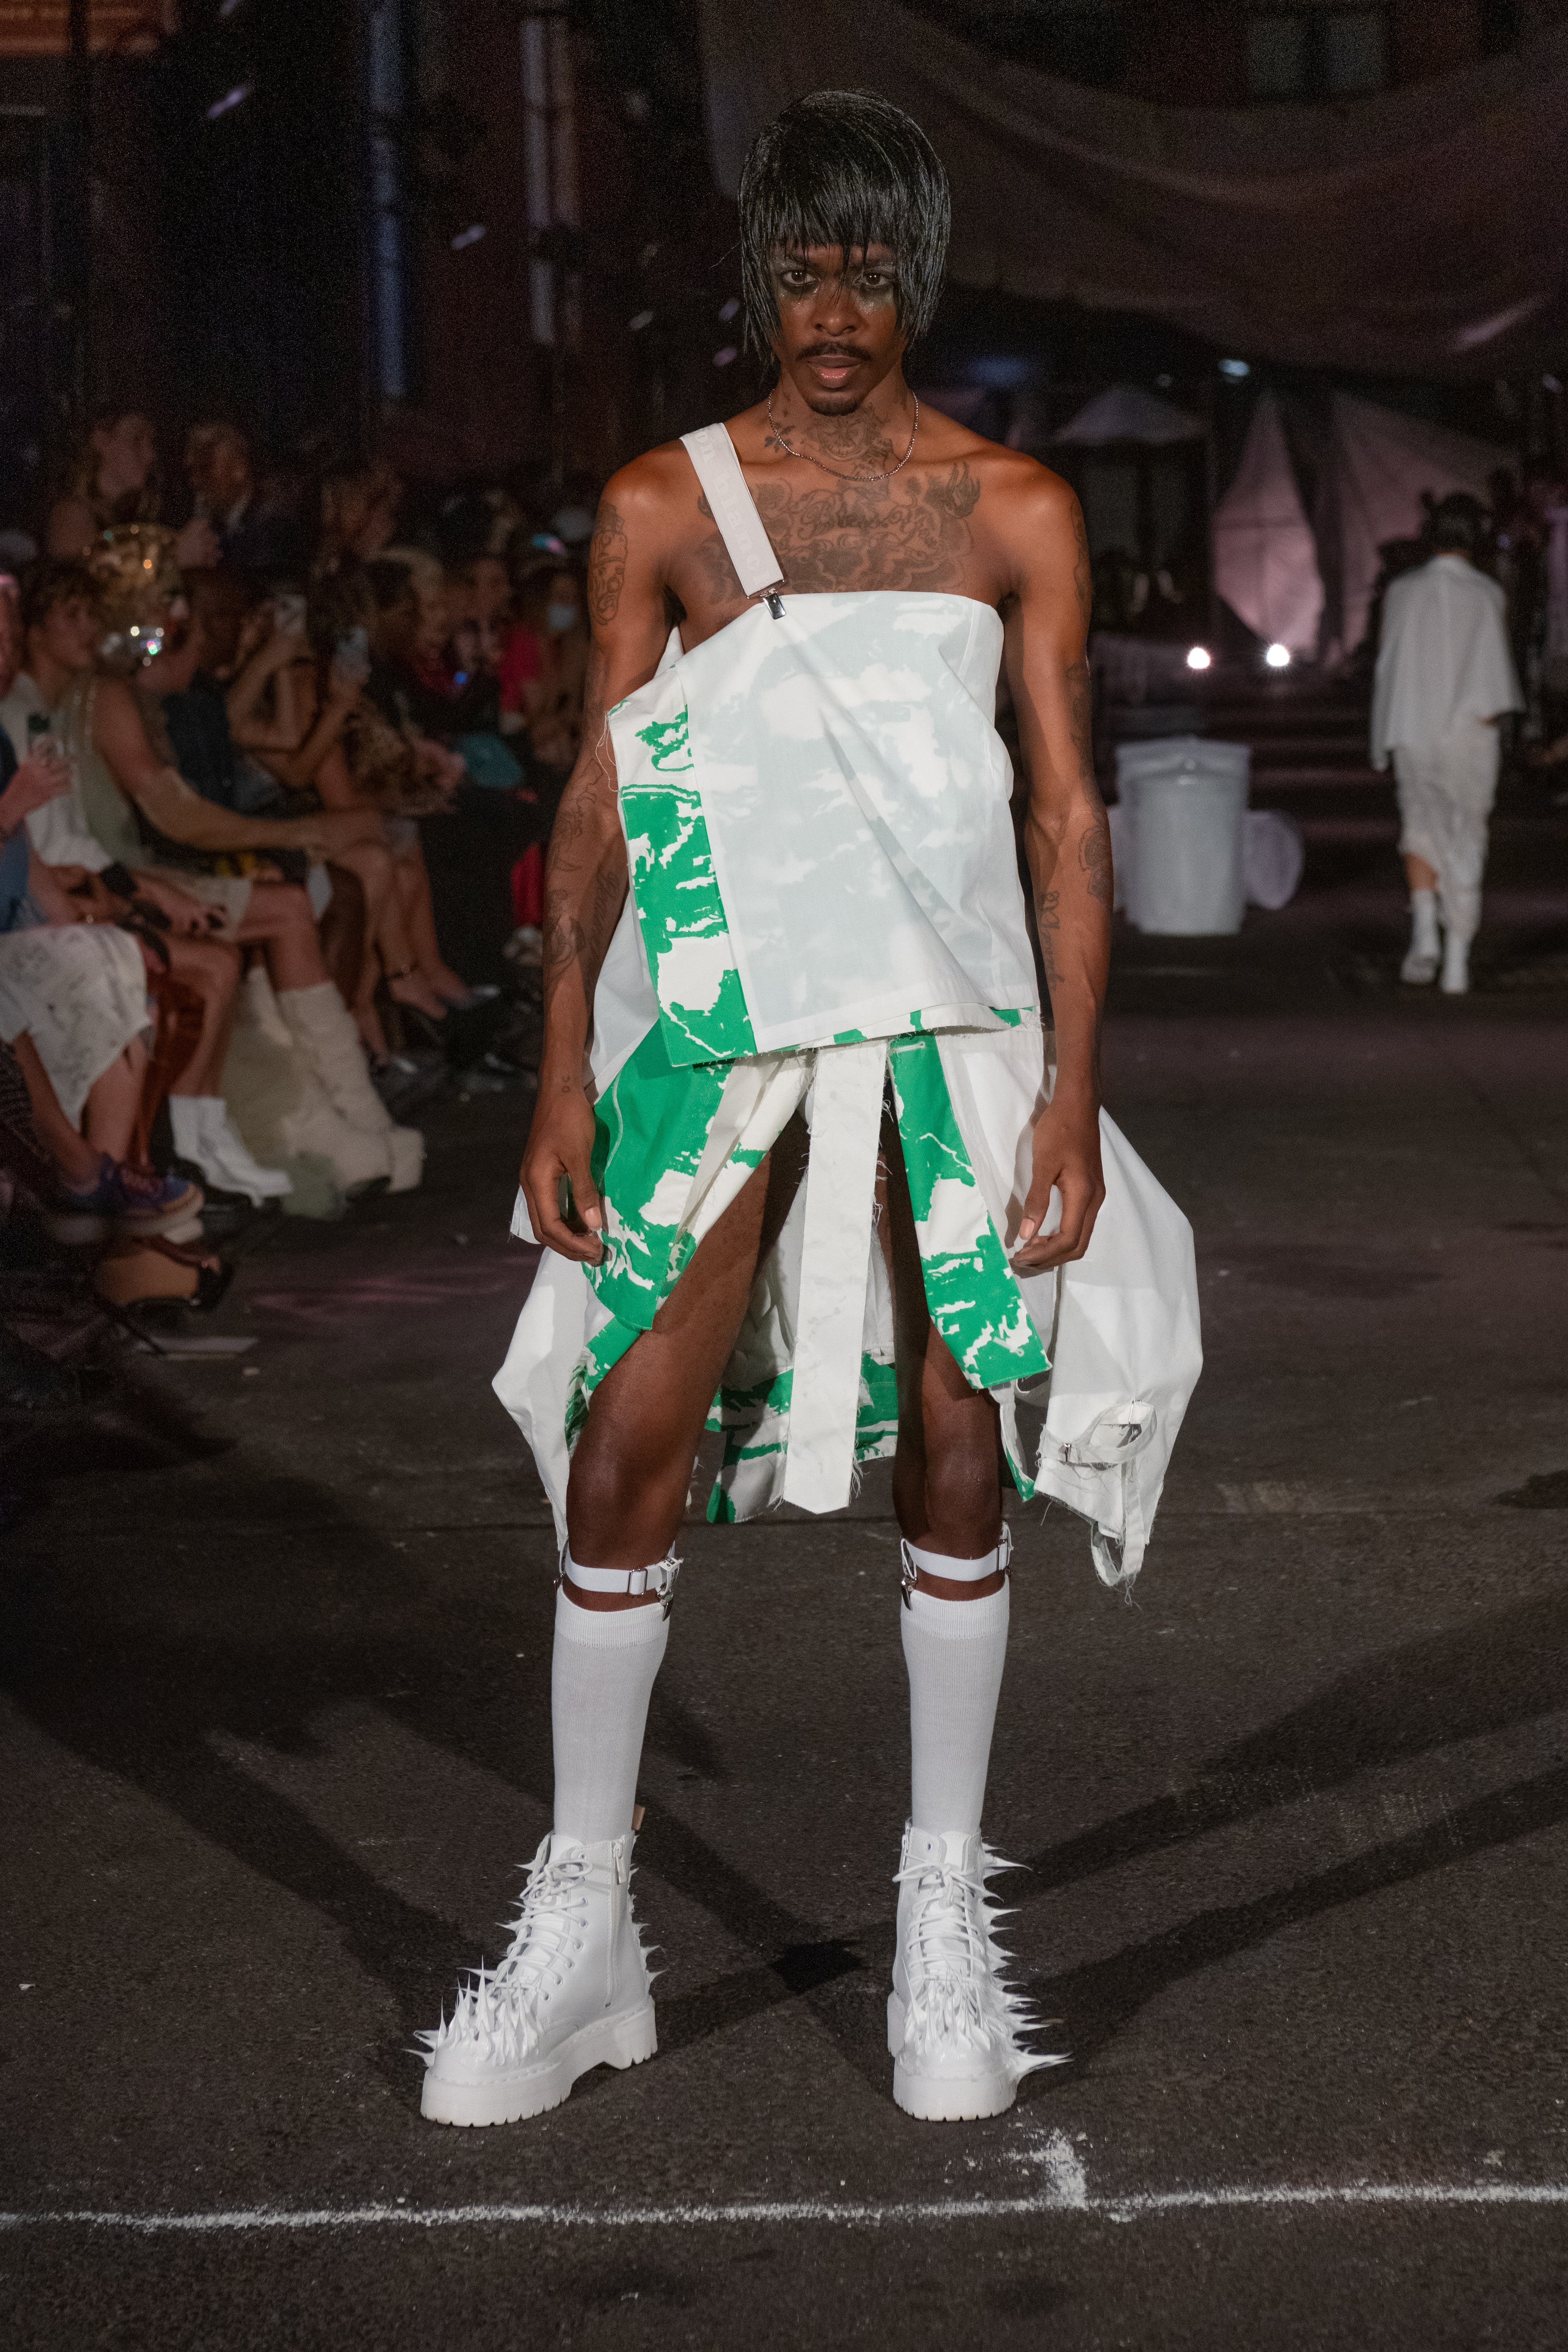 Maison Blanche by Yannik Zamboni NYFW SS23 9.14.22 - photo by Andrew Werner, Z72_3915.jpg__PID:d638a5e1-cafc-4705-a206-6828982def1c